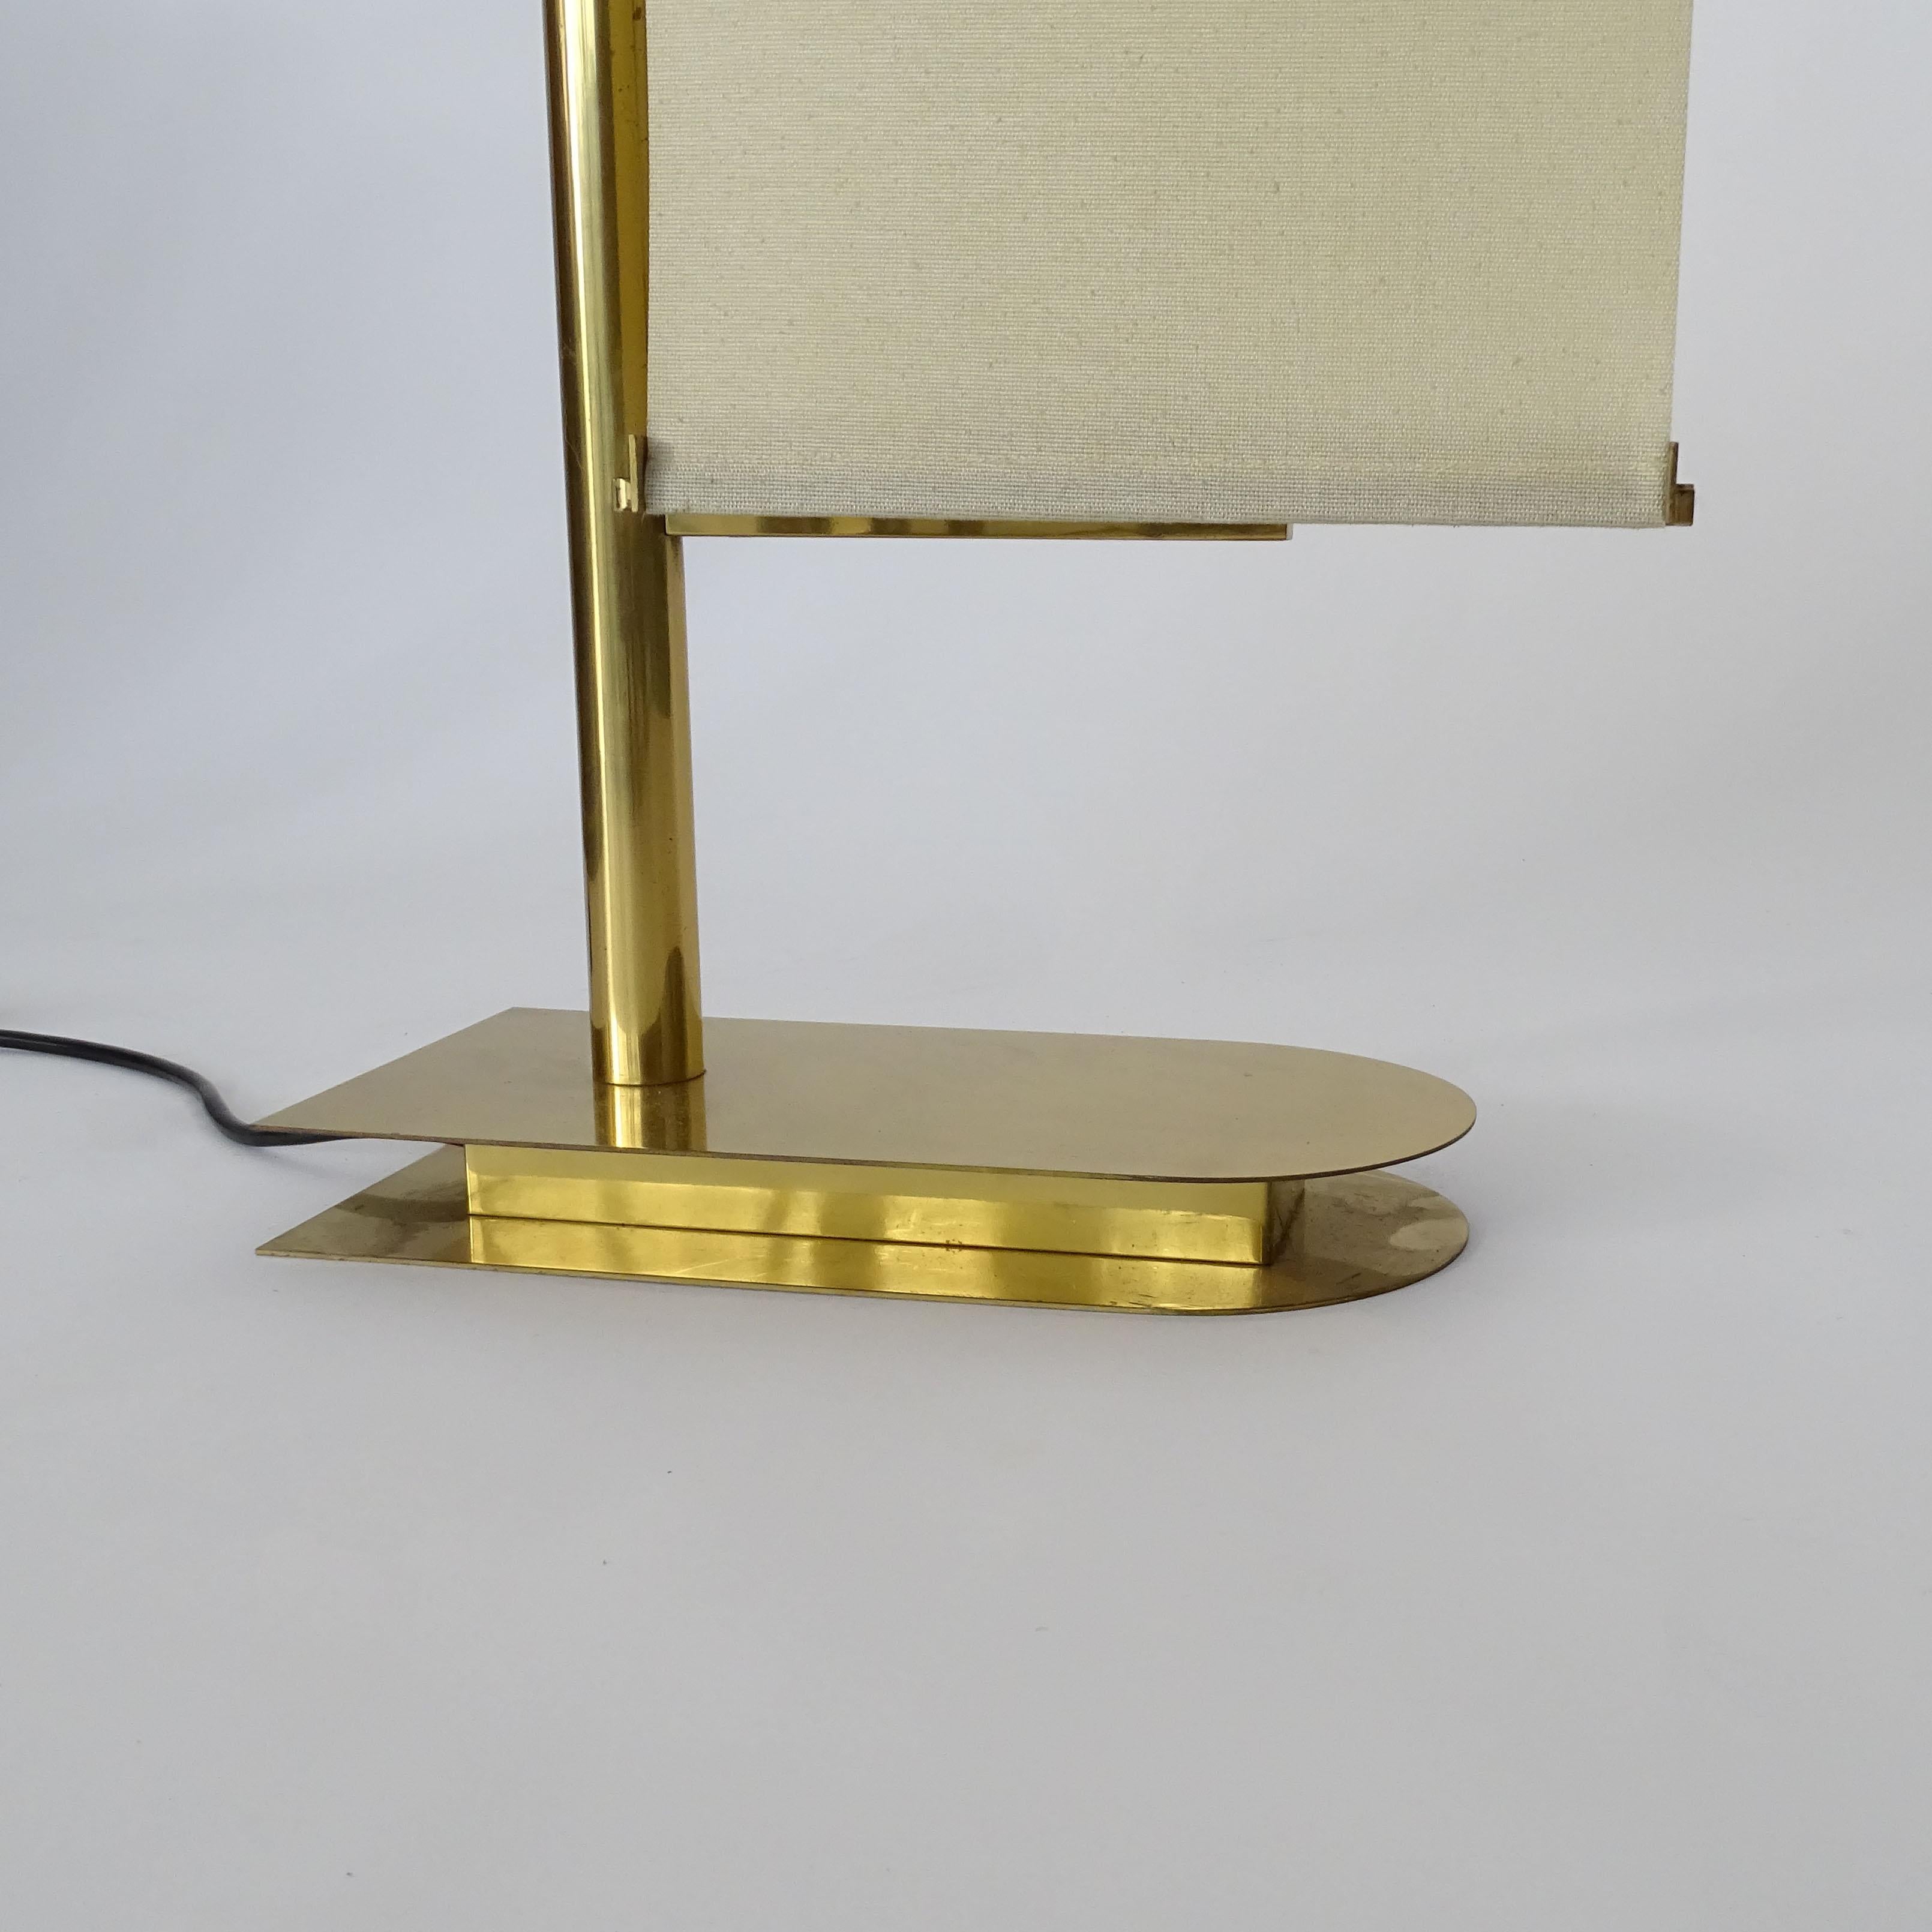 Mid-20th Century Pietro Chiesa Floor Lamp in brass and linen for Fontana Arte, Italy 1933